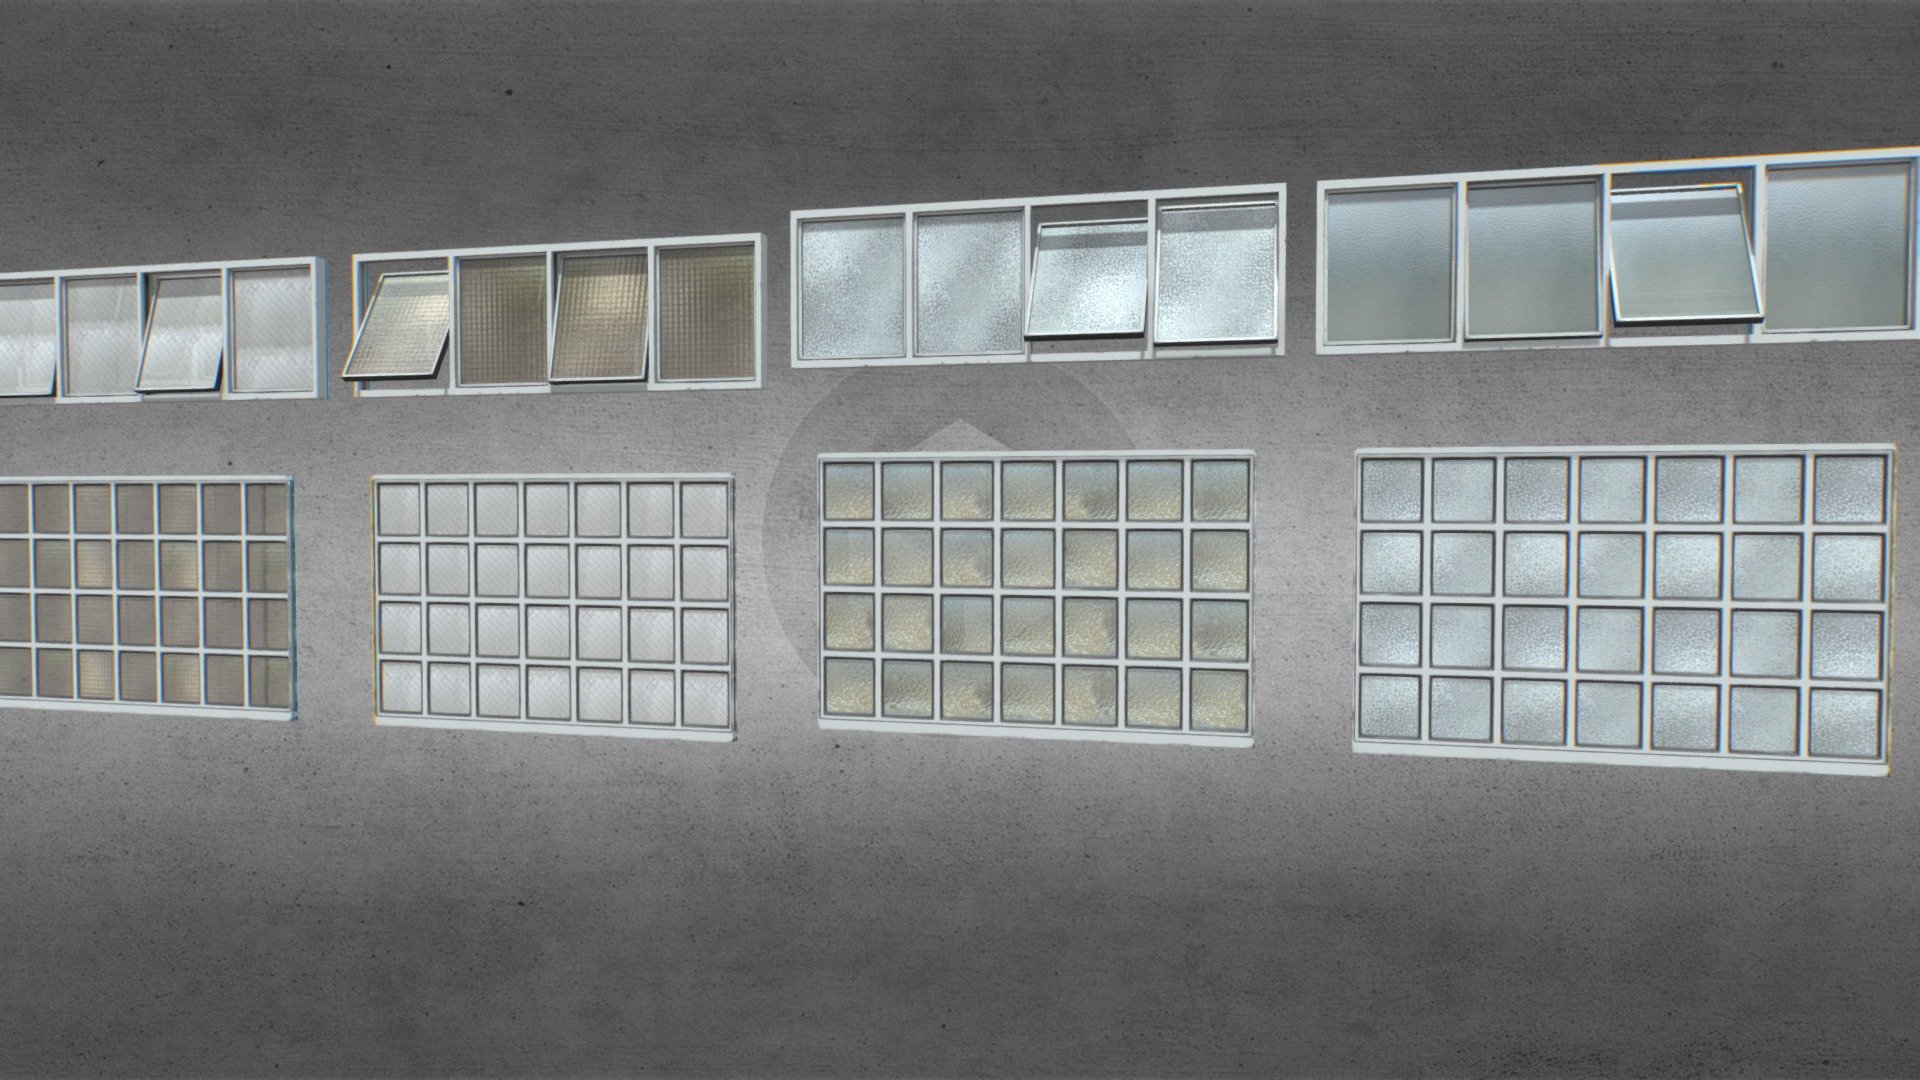 Pack of 4 different windows with painted frame. Based on realistic windows.

Comes with PBR 4096pix texture sets including Albedo, Normal, Roughness, Metalness, AO. TGA textures.

Suitable for factories, warehouses, hangars, etc..

In the window with 4 glasses, the 4 windows can be opened 3d model